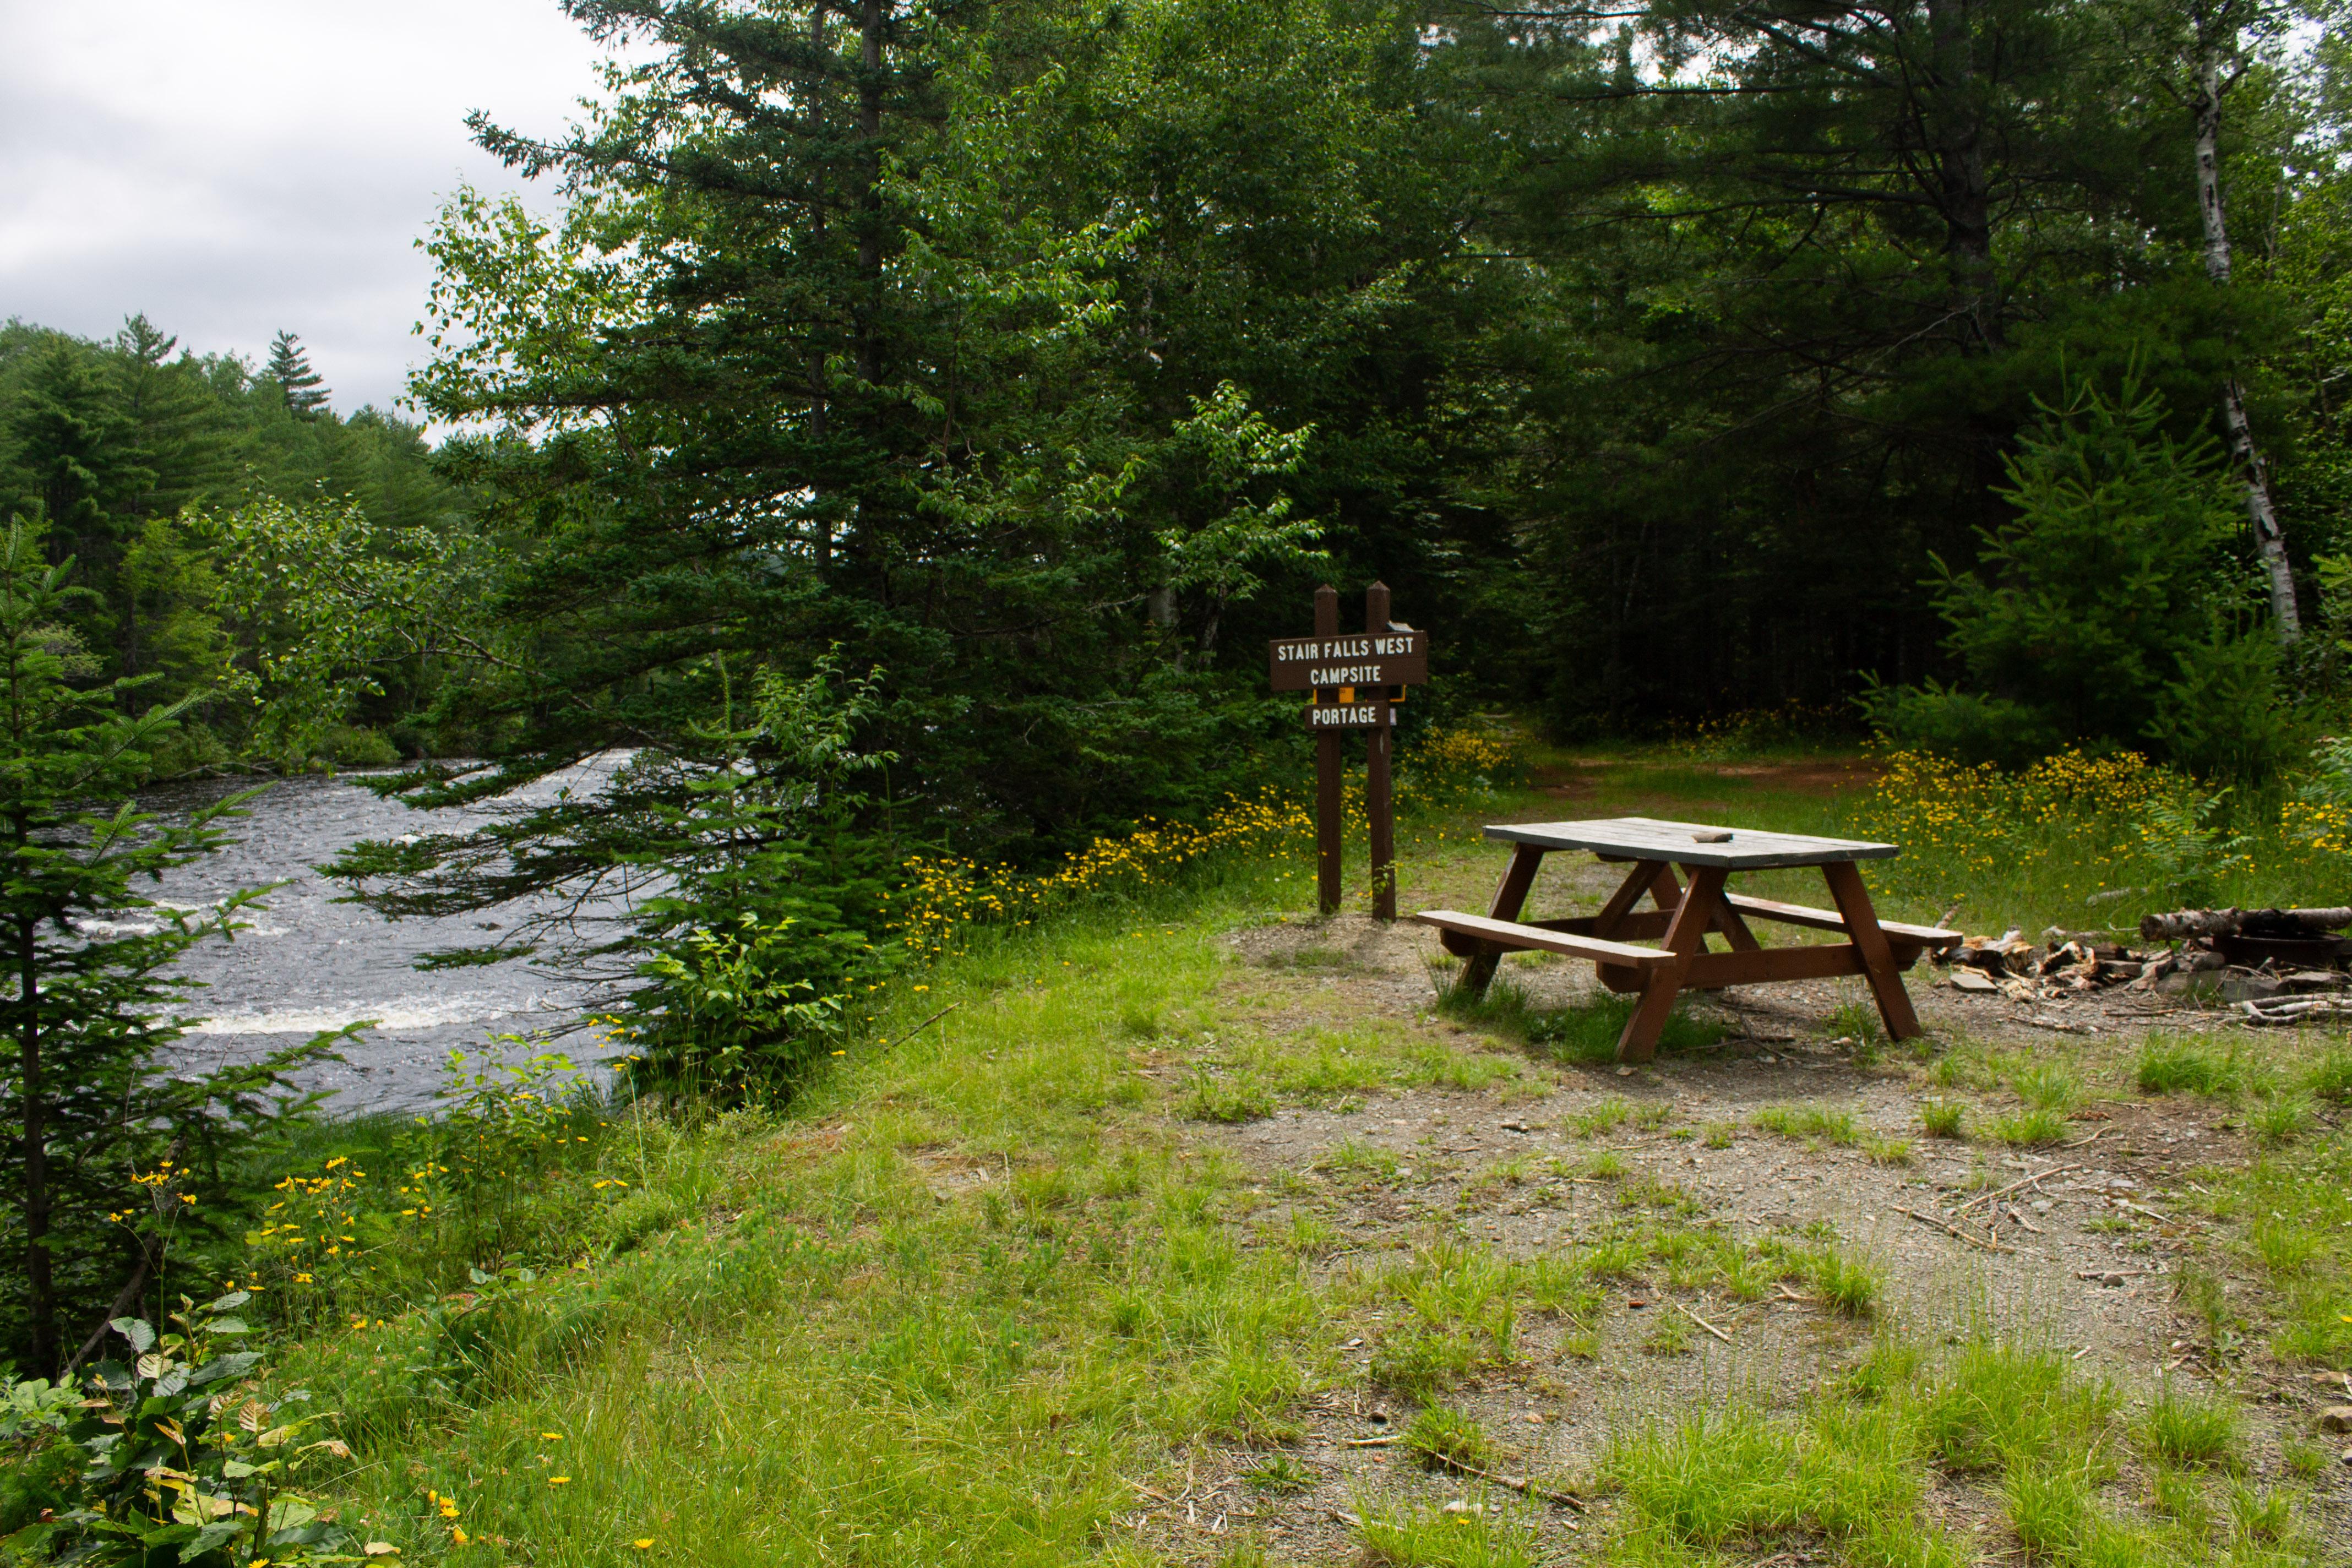 Sign reading "Stair Falls West Campsite Portage" next to a river, with a picnic table.